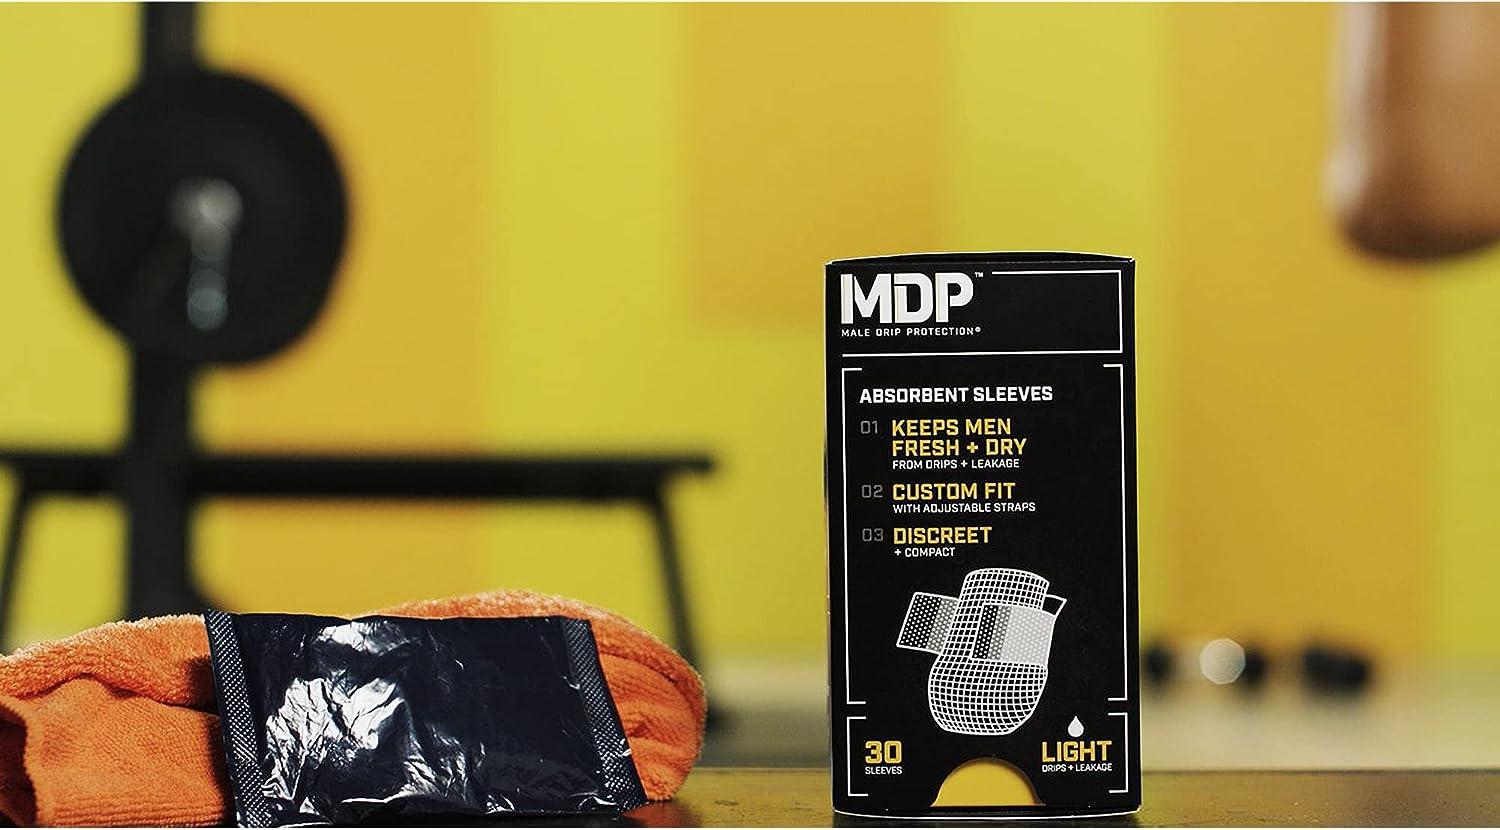 MDP Male Drip Protection | Absorbent Sleeves for Drip Protection, Mens Pads  for Urinary Incontinence - Guards for Men Stay Dry with Discreet and